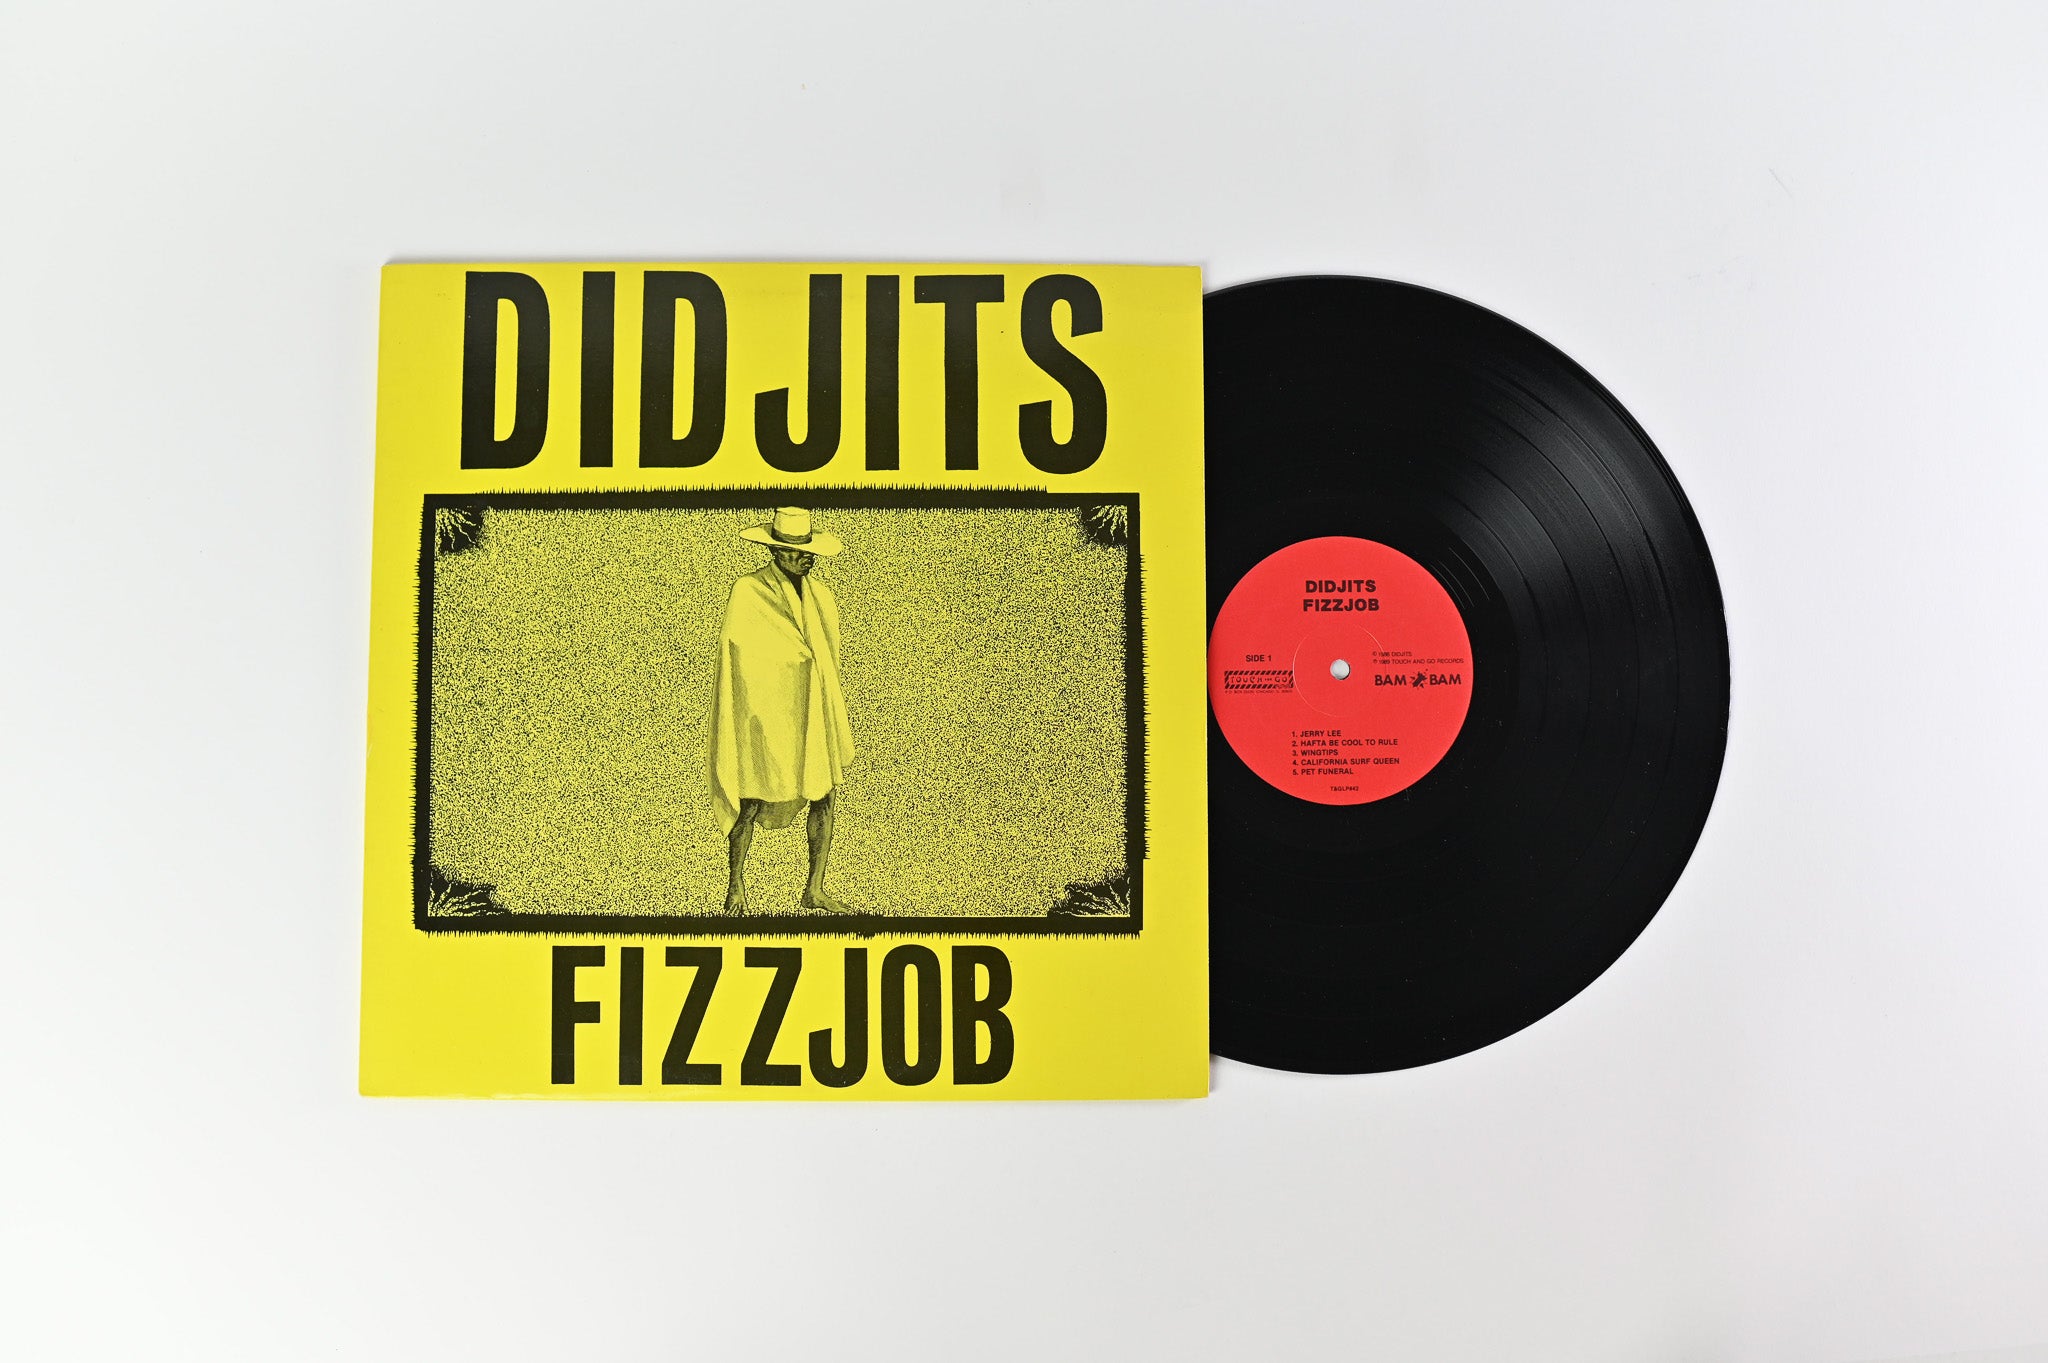 Didjits - Fizzjob Reissue on Touch And Go Records